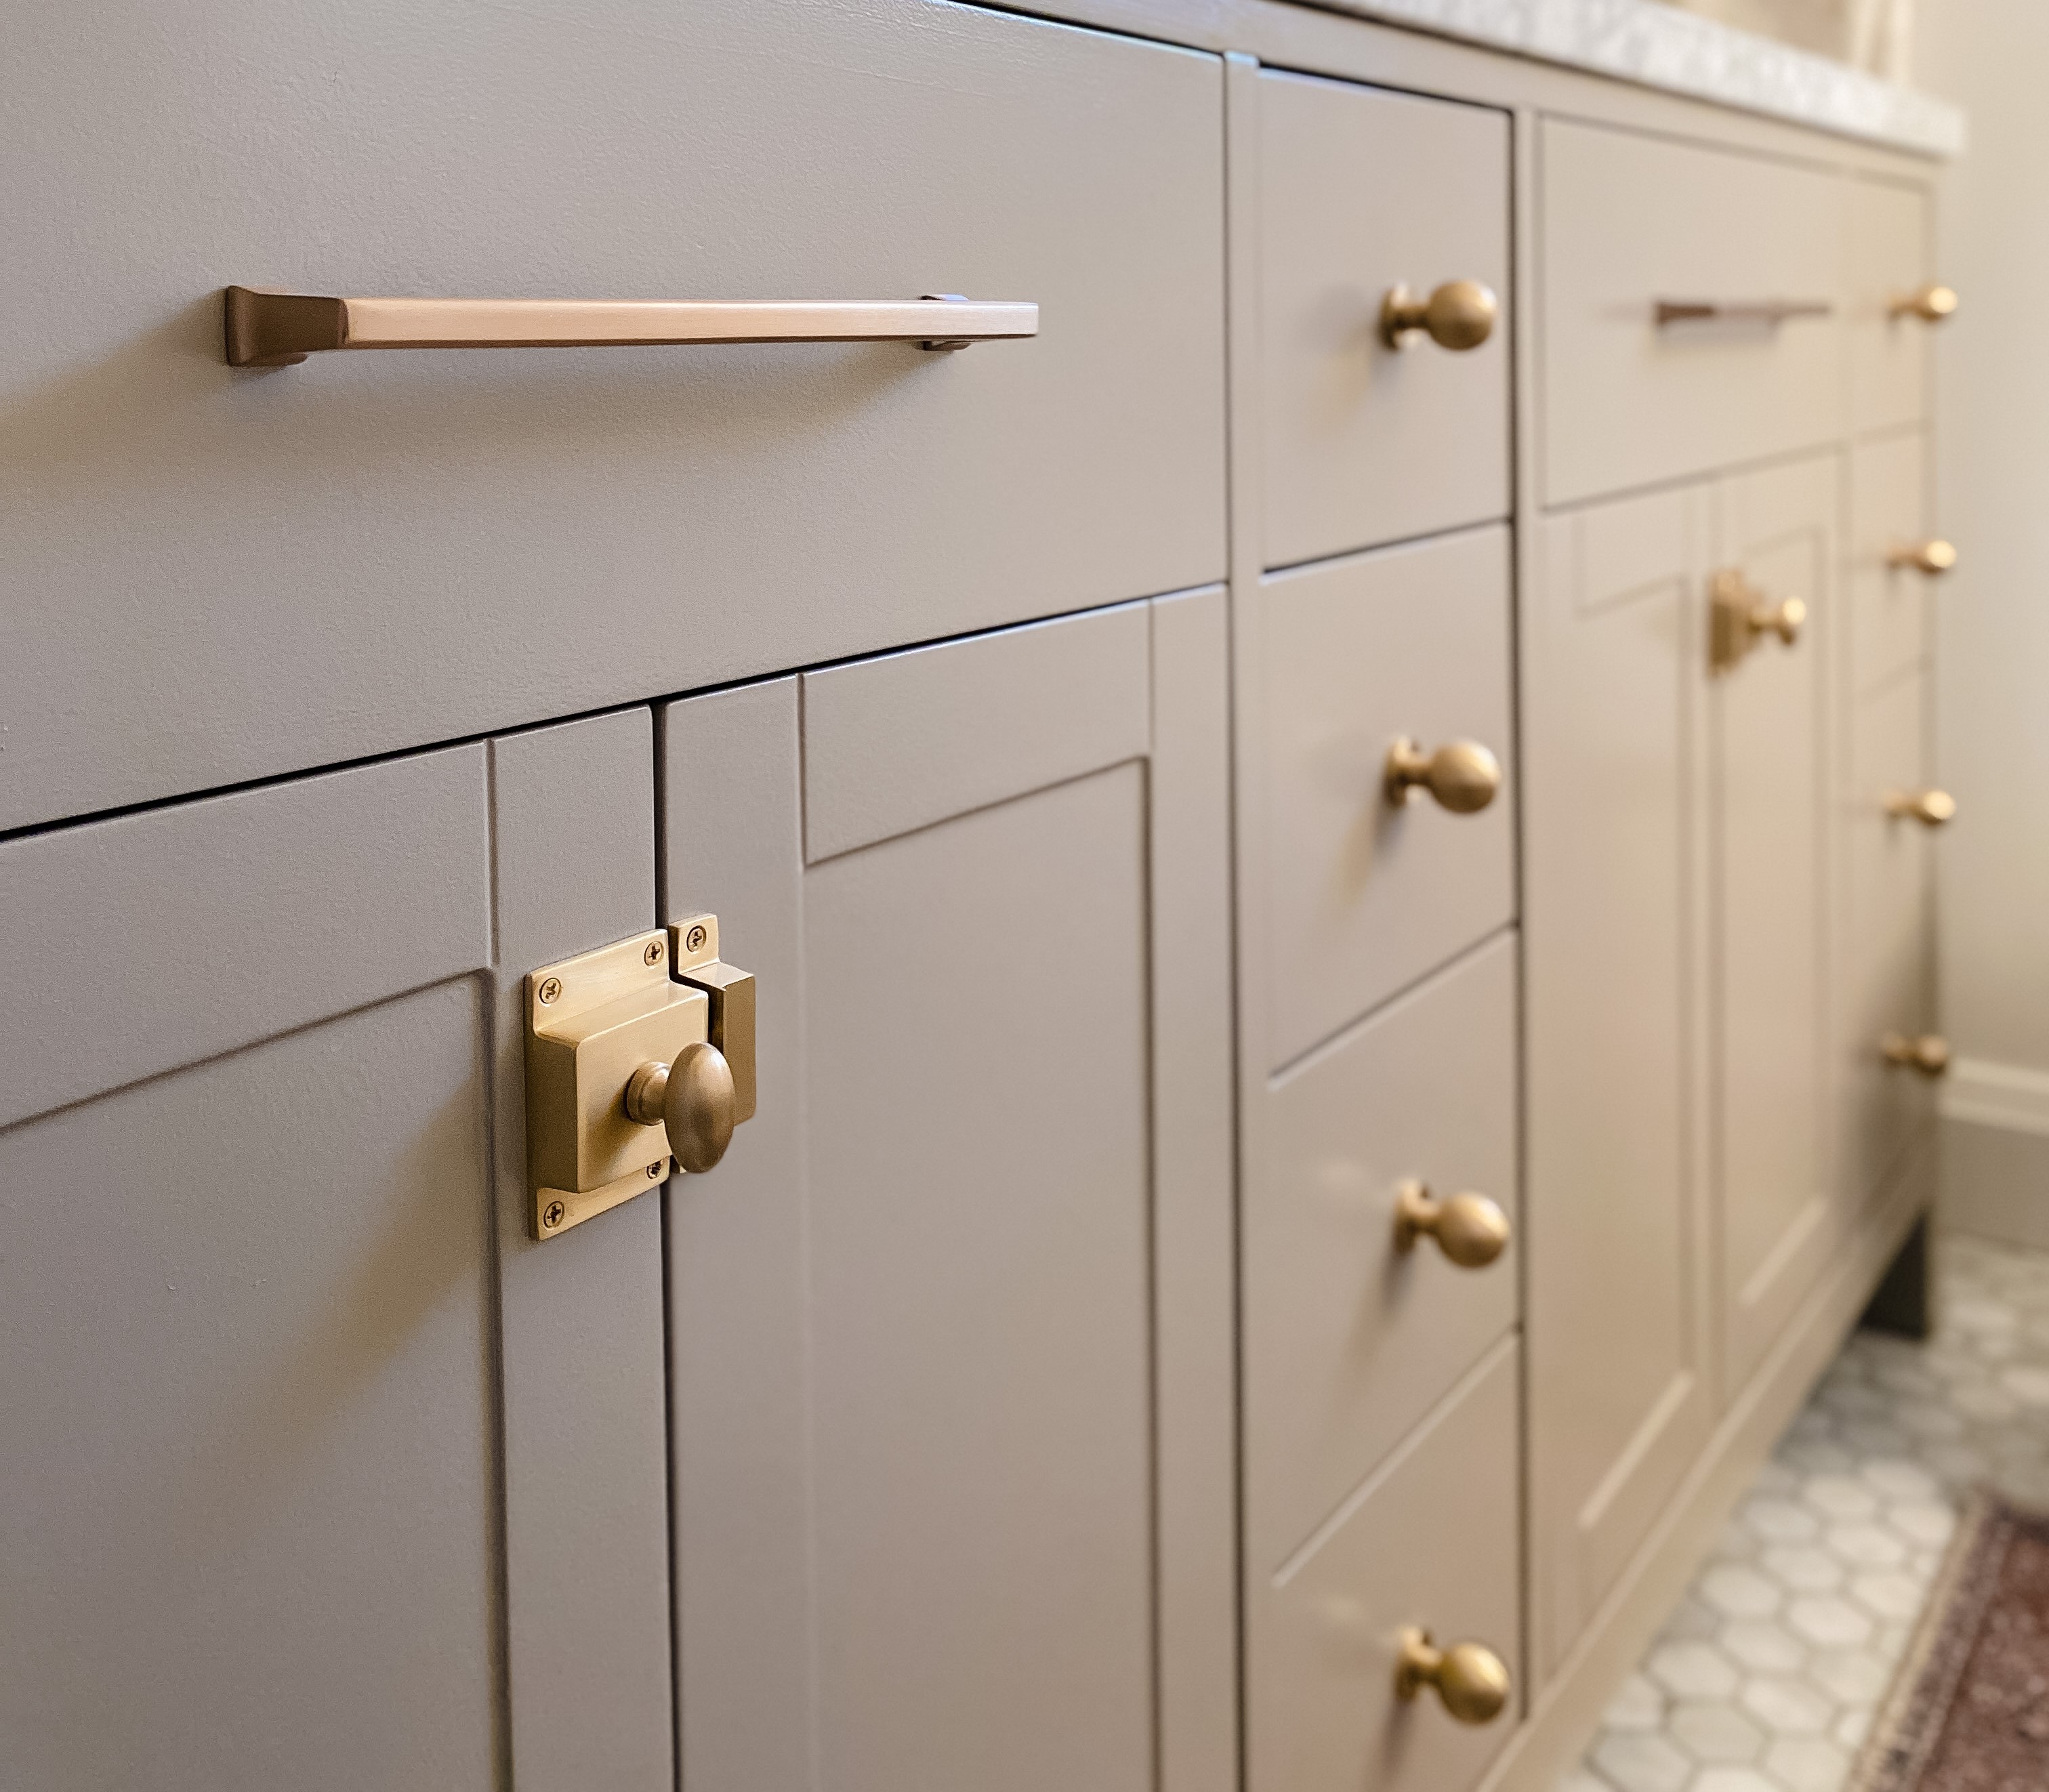 Vintage Cabinet Hinges And Latches | Cabinets Matttroy